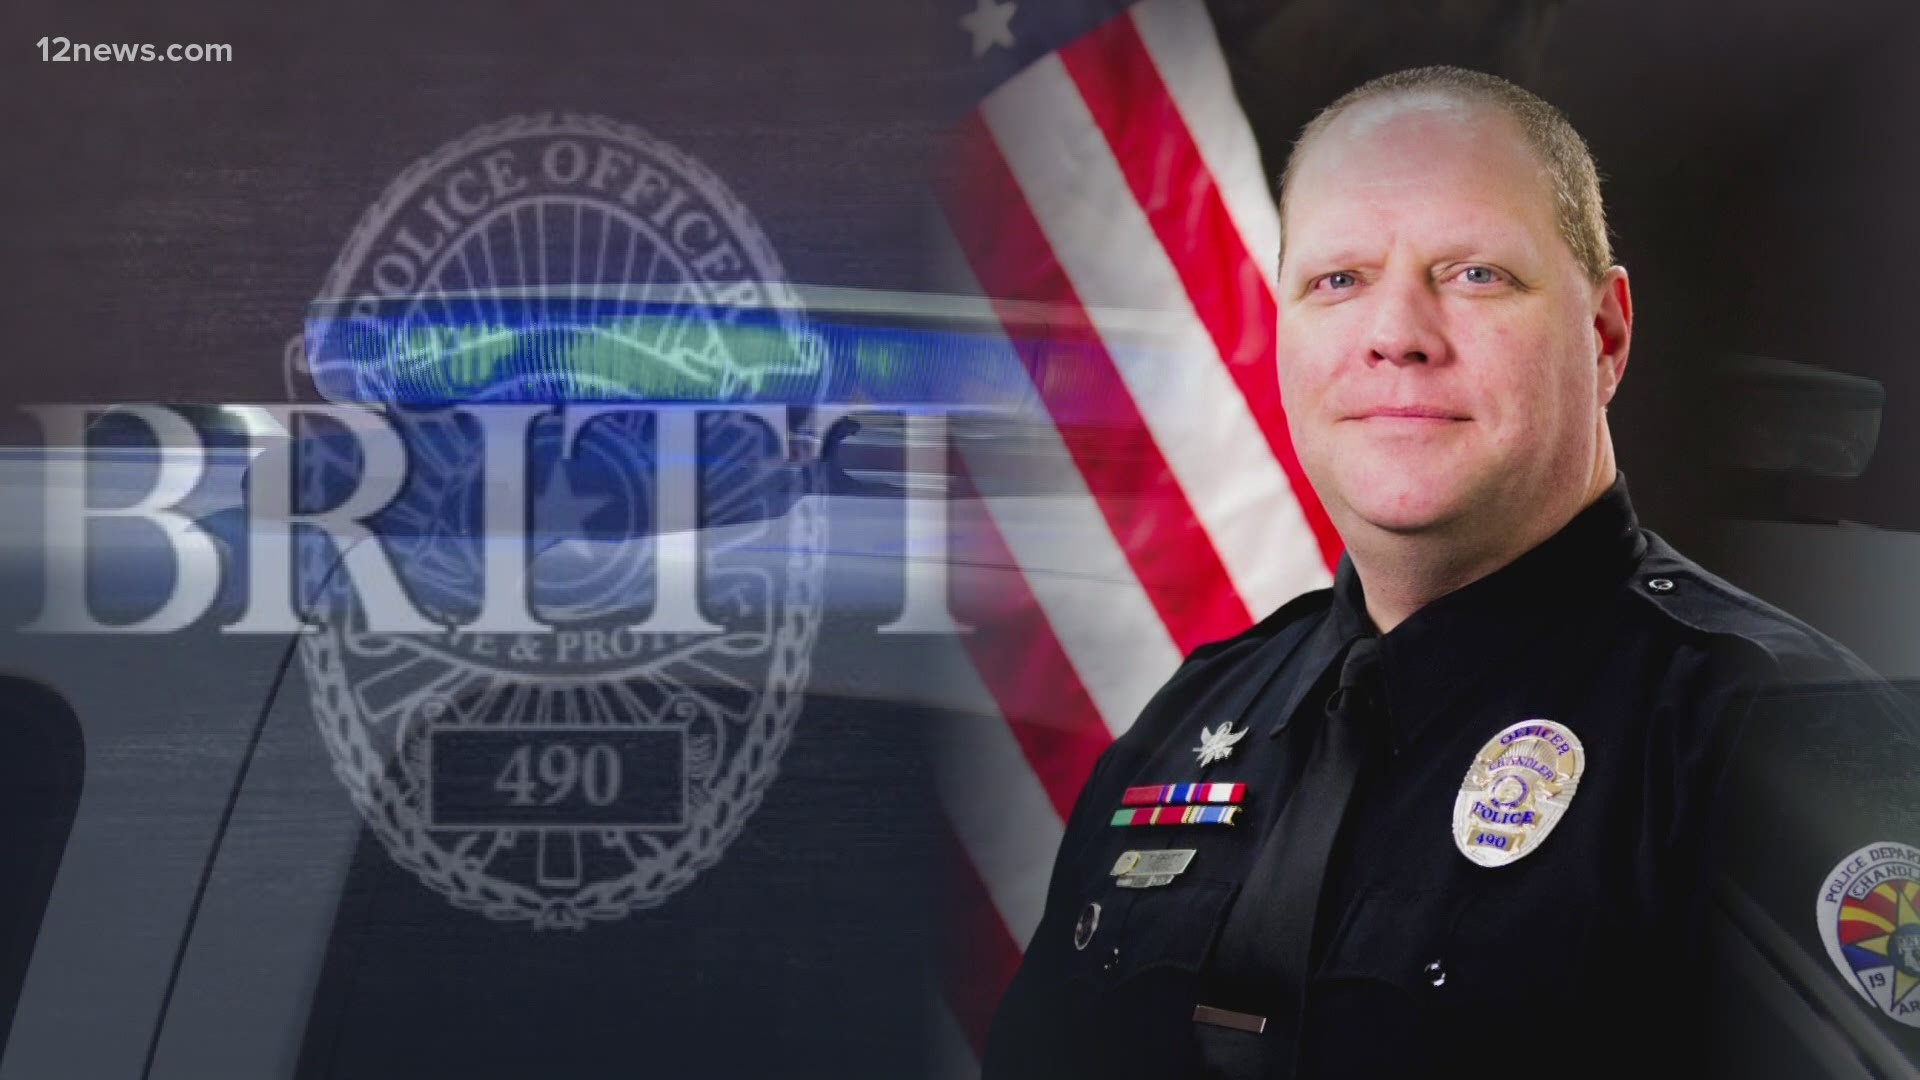 According to a tweet sent from the department, Officer Tyler Britt served 19 years with the Chandler Police Department.